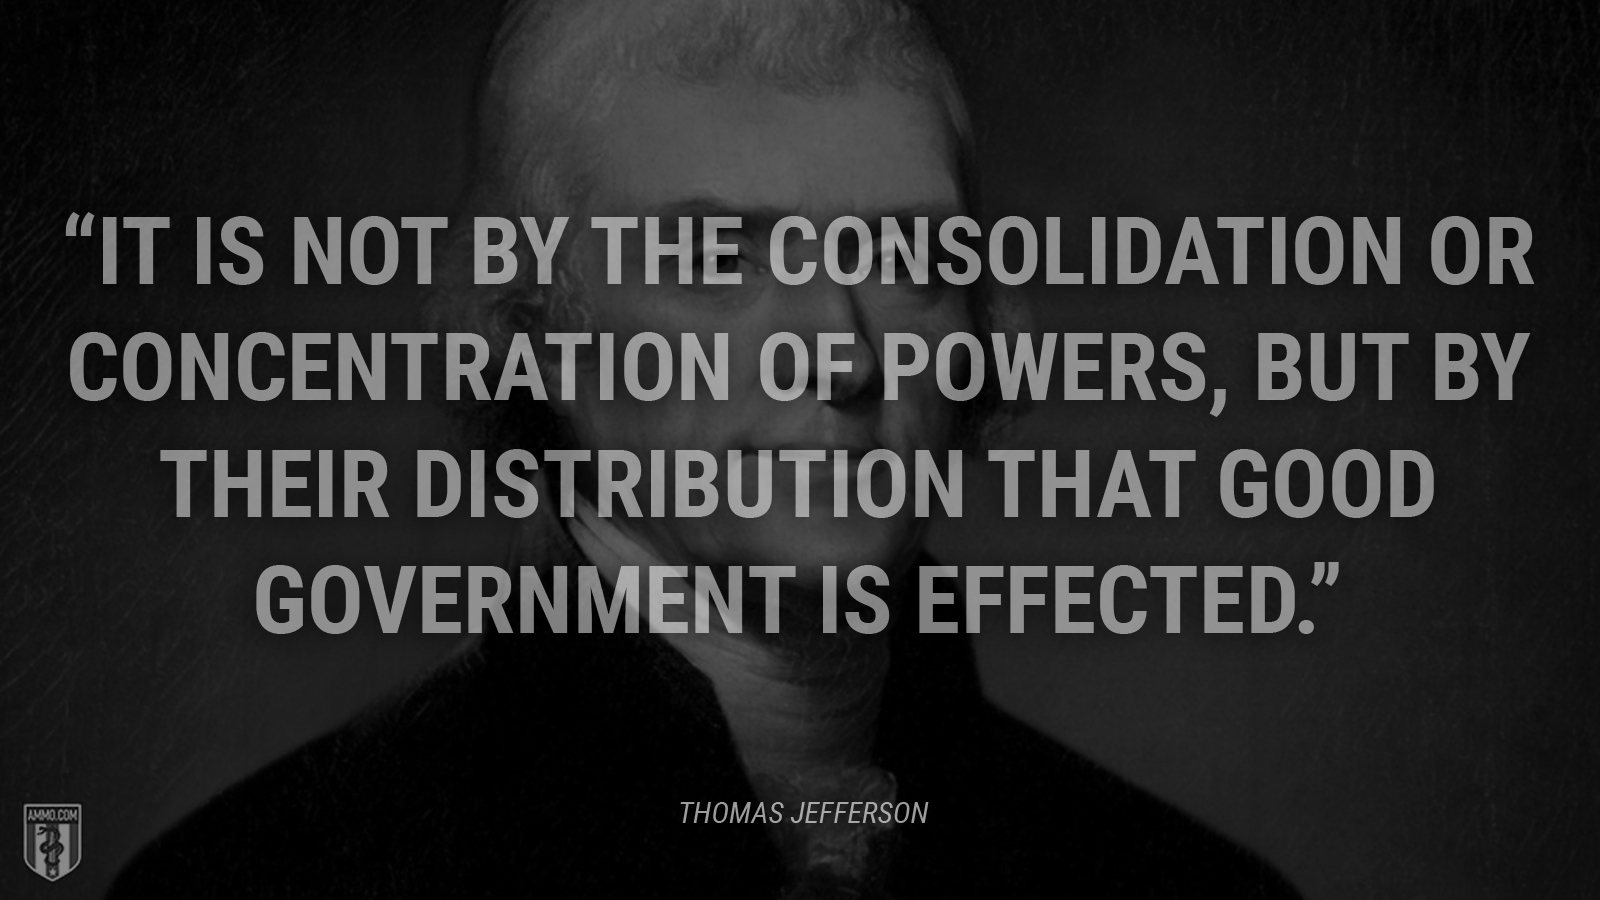 “It is not by the consolidation or concentration of powers, but by their distribution that good government is effected.” - Thomas Jefferson